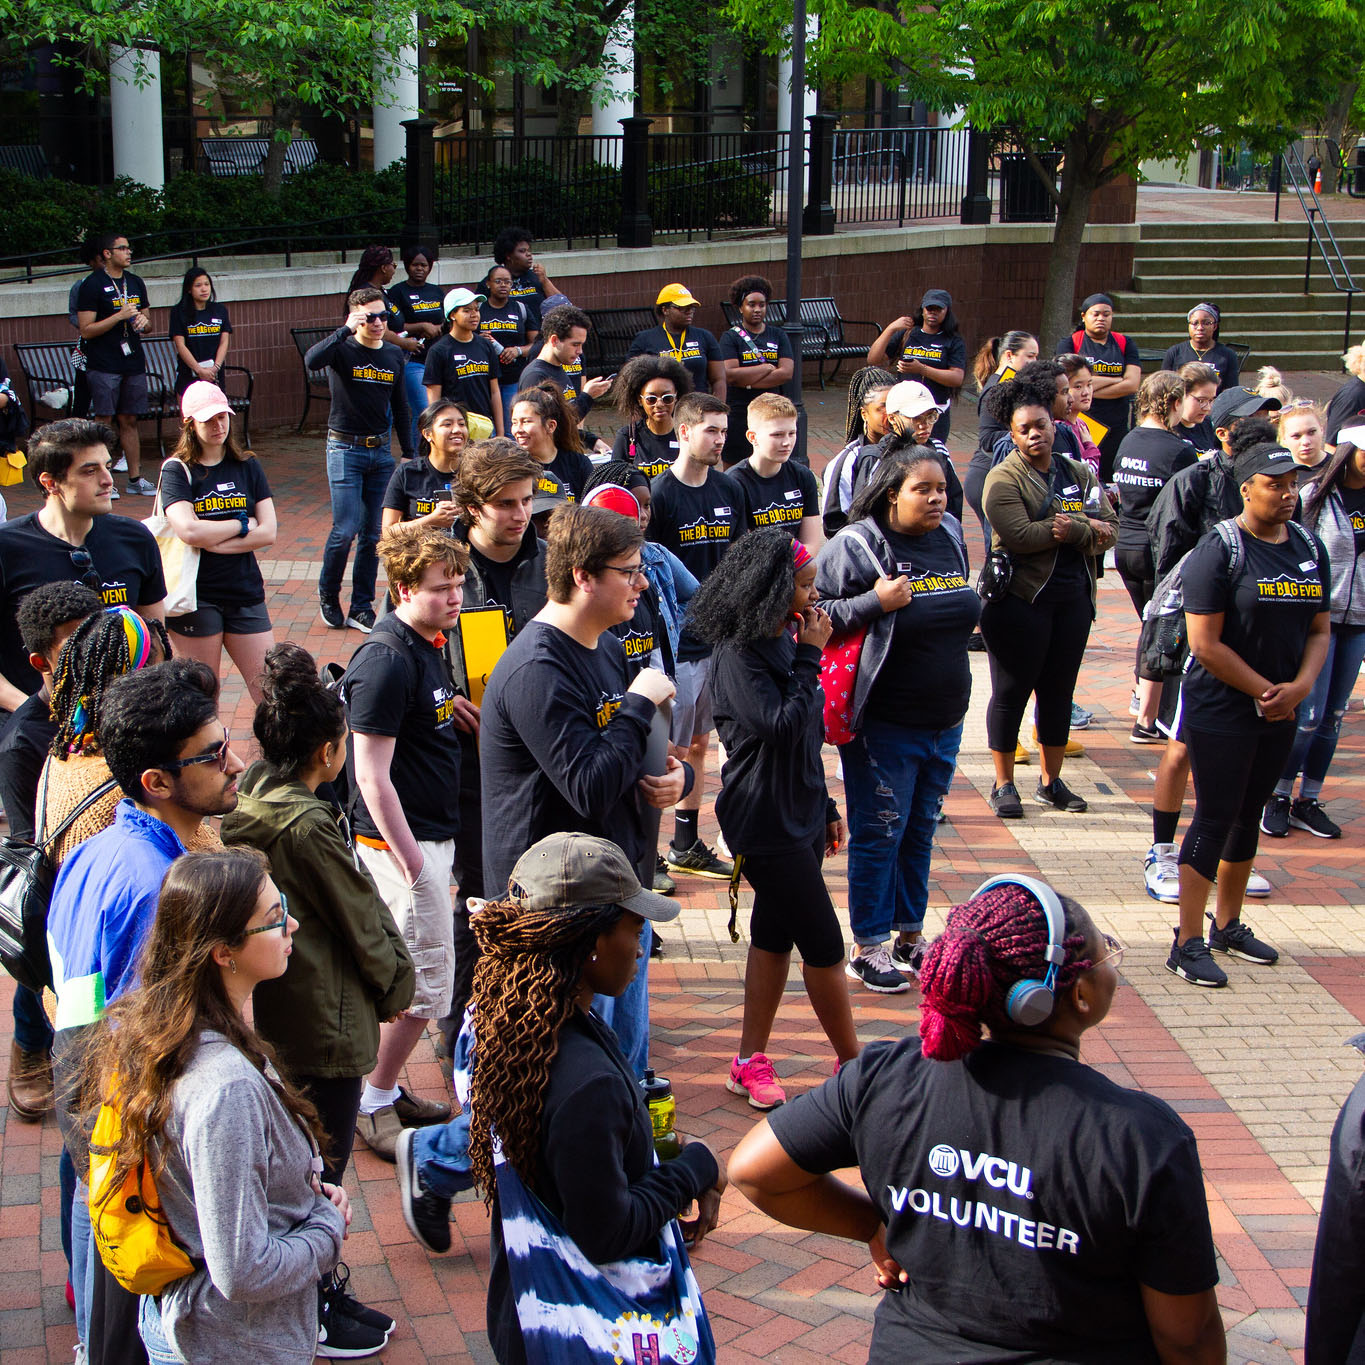 A large student group standing in Commons Plaza